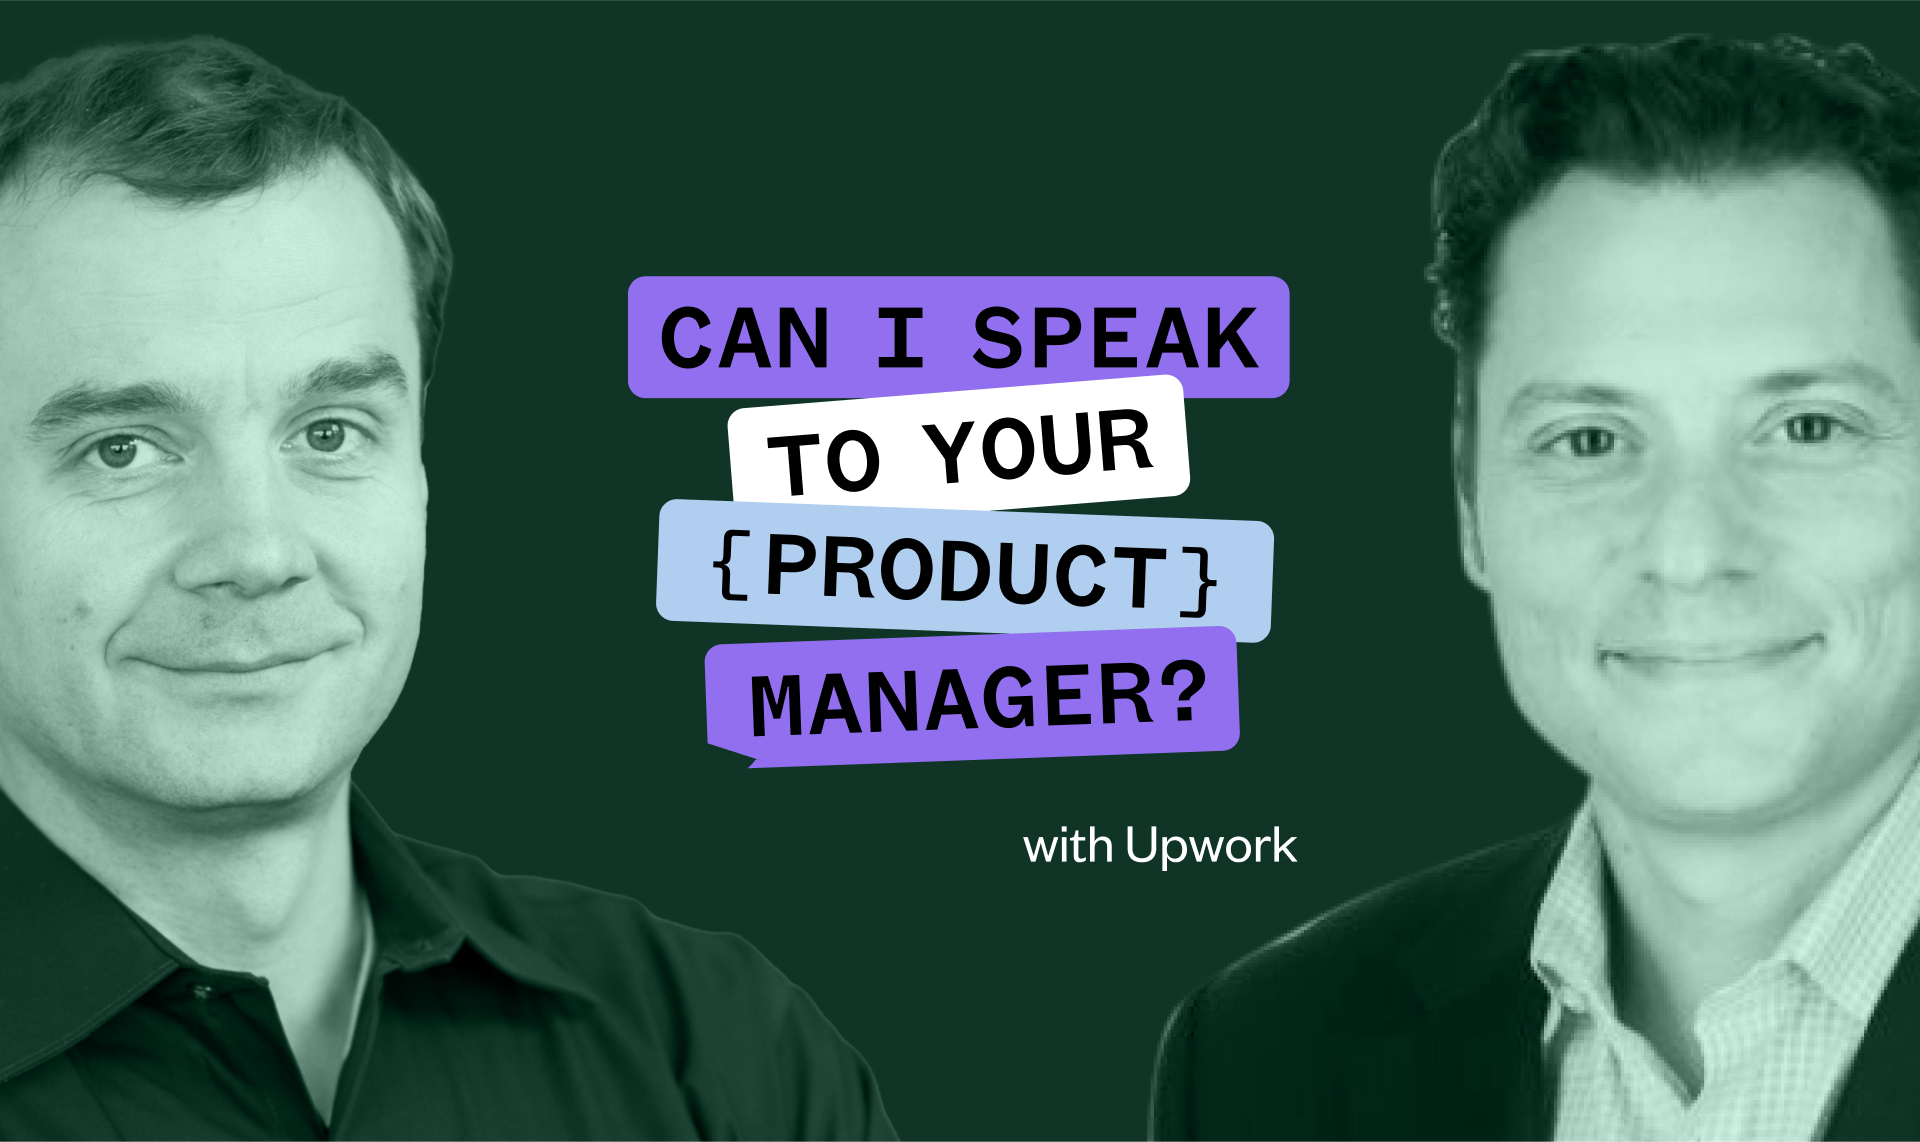 Two men are shown in a promotional graphic for a podcast titled "Can I Speak to Your {Product} Manager?" with Upwork. A speech bubble highlights the podcast title between their images.